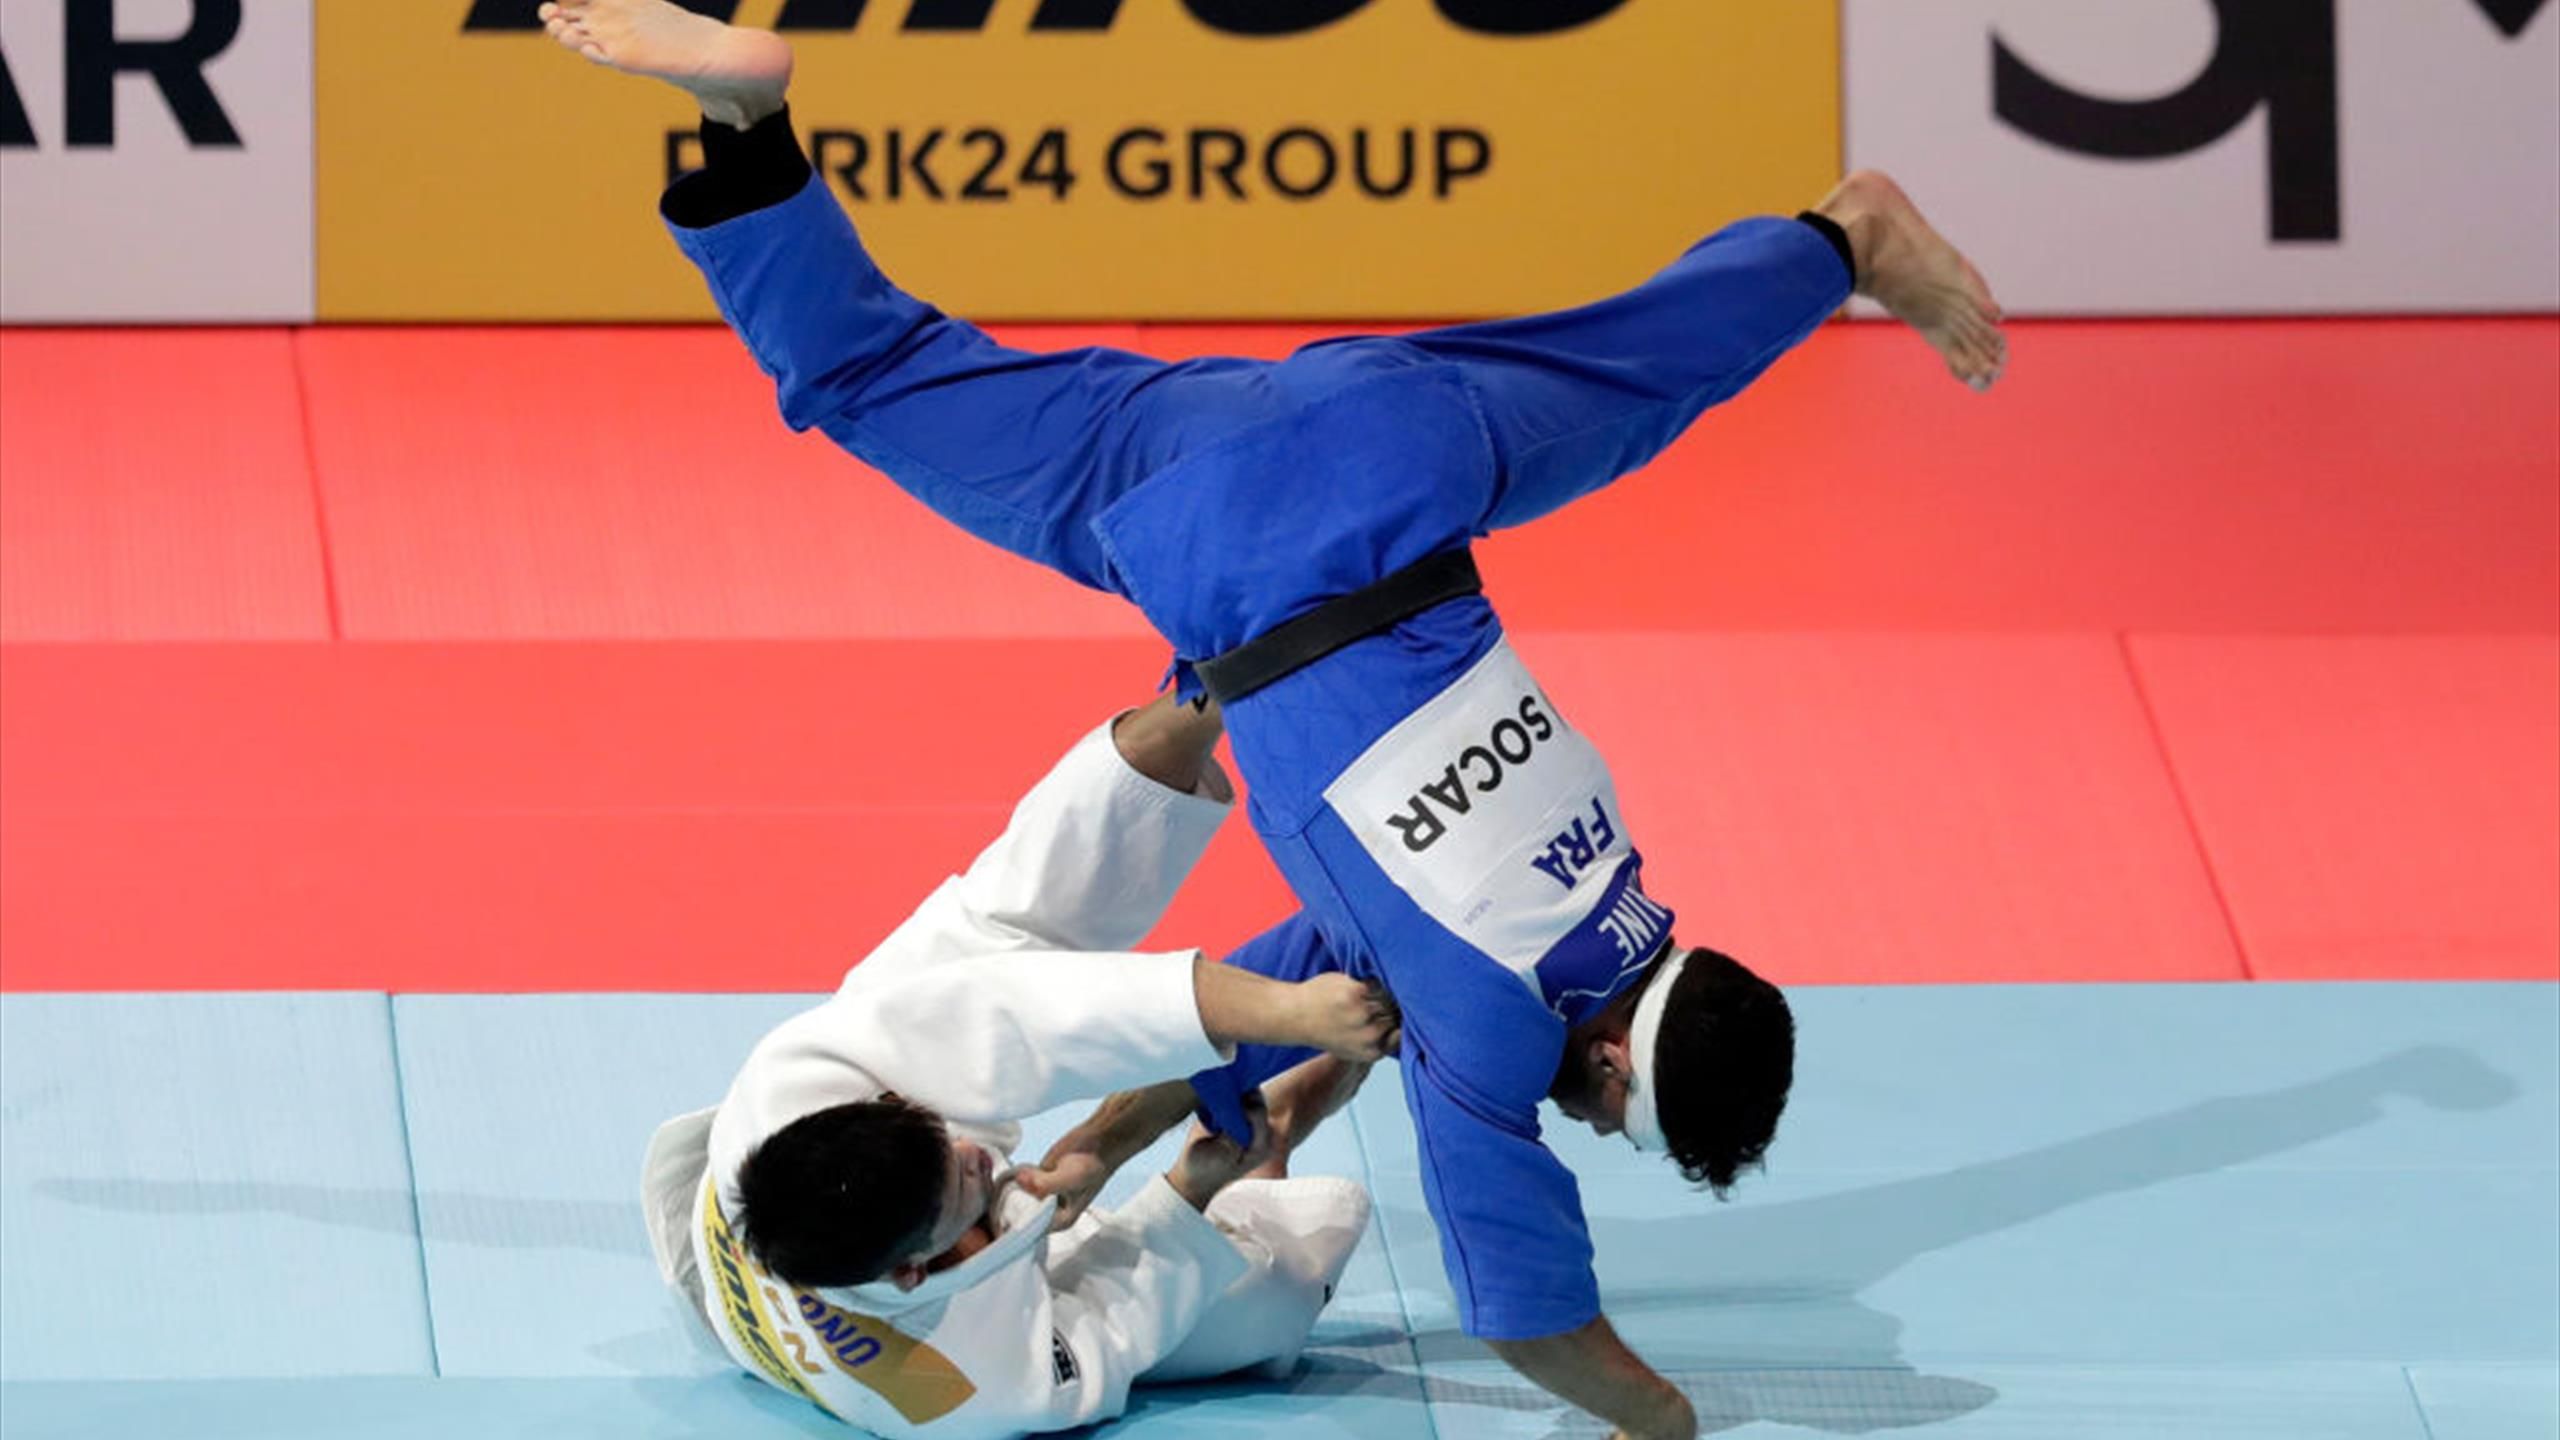 Japan win hat-trick of IJF World Championship mixed team golds in Tokyo